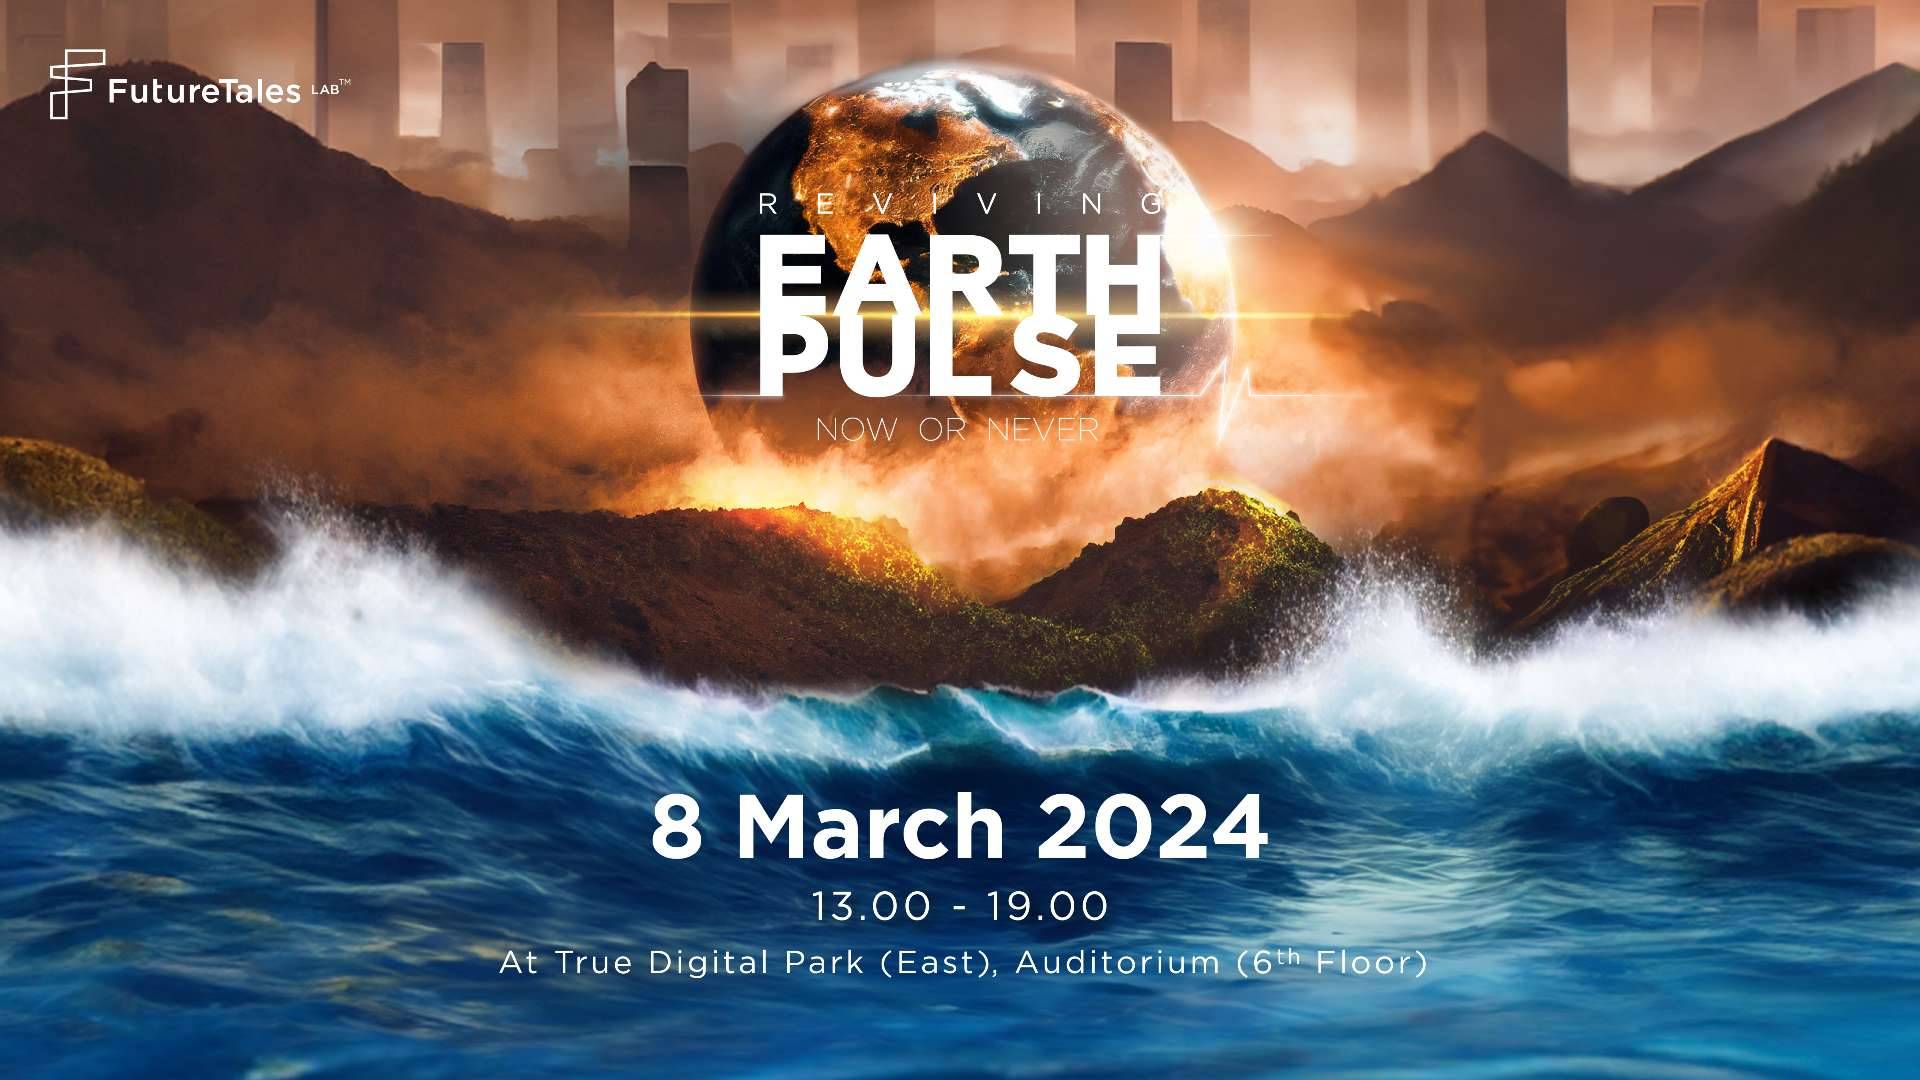 Reviving Earth Pulse - Now or Never